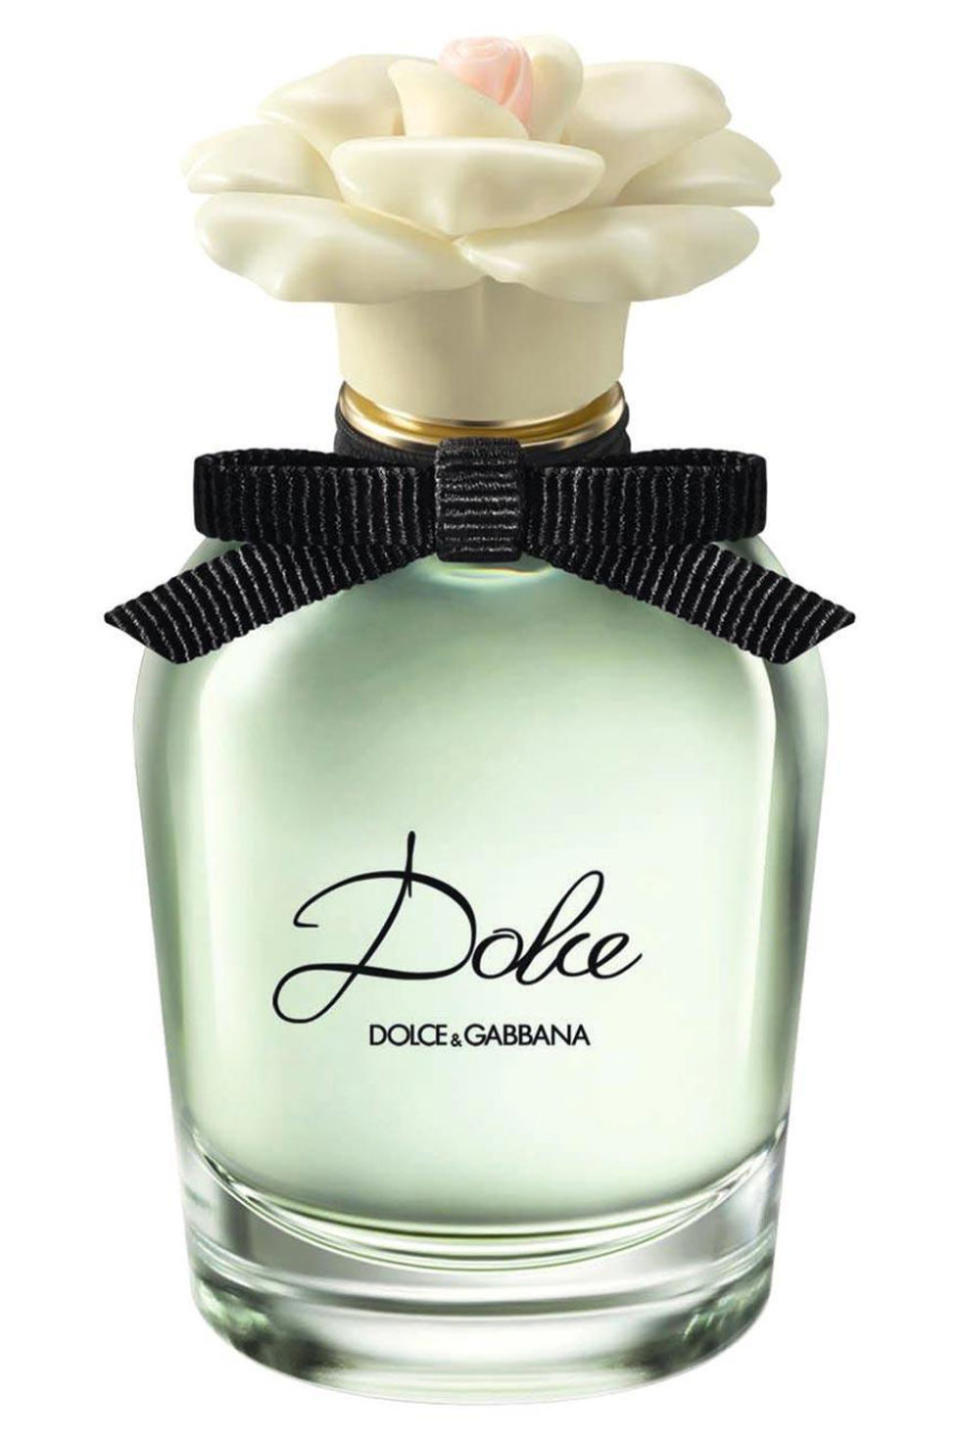 <strong>TRY</strong>: Dolce by Dolce&Gabbana, $93, which smells like a just-picked bouquet of white flowers, including daffodils, water lilies, amaryllis, and neroli.